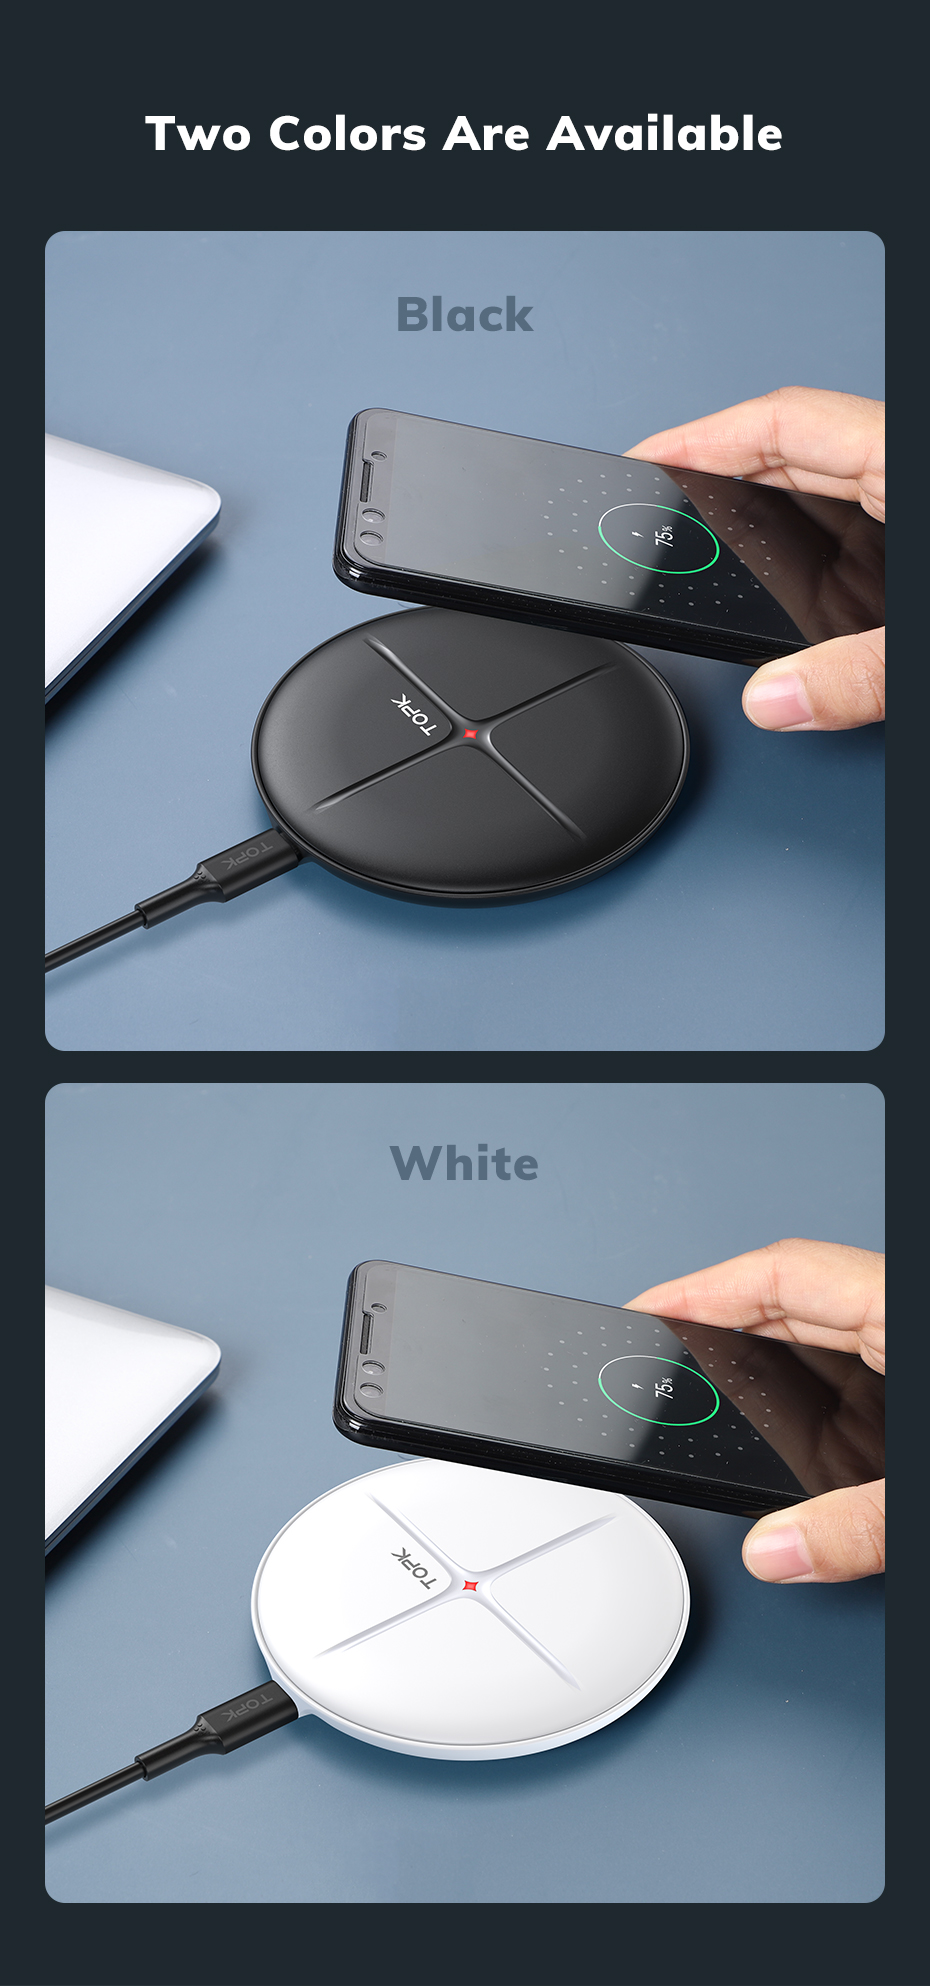 TOPK-B09W-10W-75W-5W-Wireless-Charger-Fast-Wireless-Charging-Pad-For-Qi-enabled-Smart-Phones-For-iPh-1889022-8